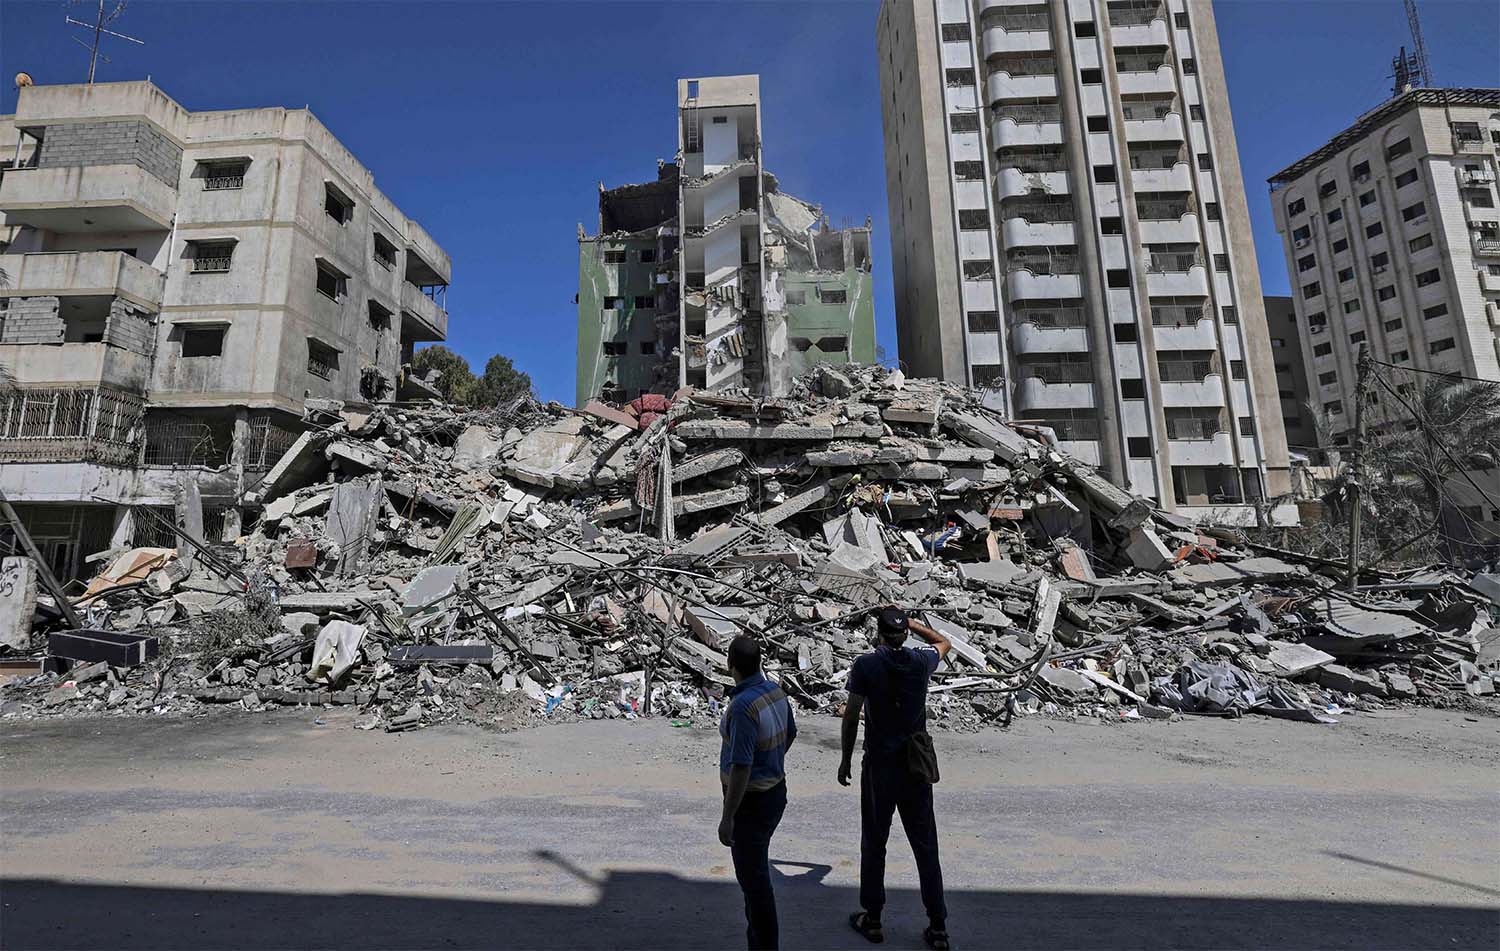 Israel air strikes that have killed more than 200 Palestinians since the violence began